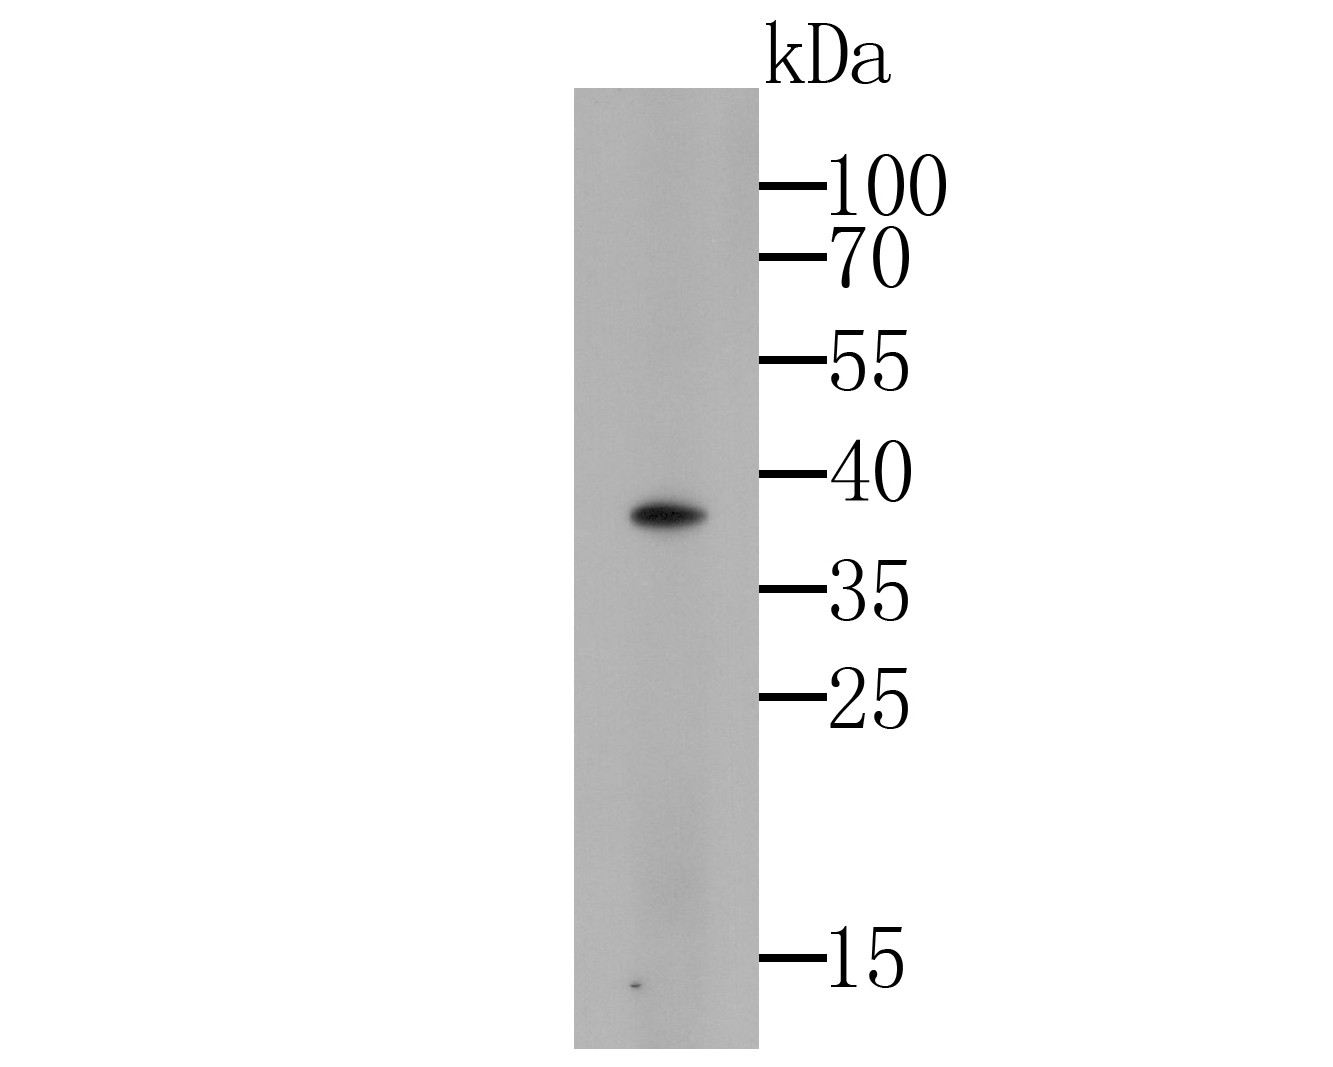 Western blot analysis of GAPDH on zebrafish tissue lysates. Proteins were transferred to a PVDF membrane and blocked with 5% BSA in PBS for 1 hour at room temperature. The primary antibody (M1310-2, 1/500) was used in 5% BSA at room temperature for 2 hours. Goat Anti-Mouse IgG - HRP Secondary Antibody (HA1006) at 1:5,000 dilution was used for 1 hour at room temperature.